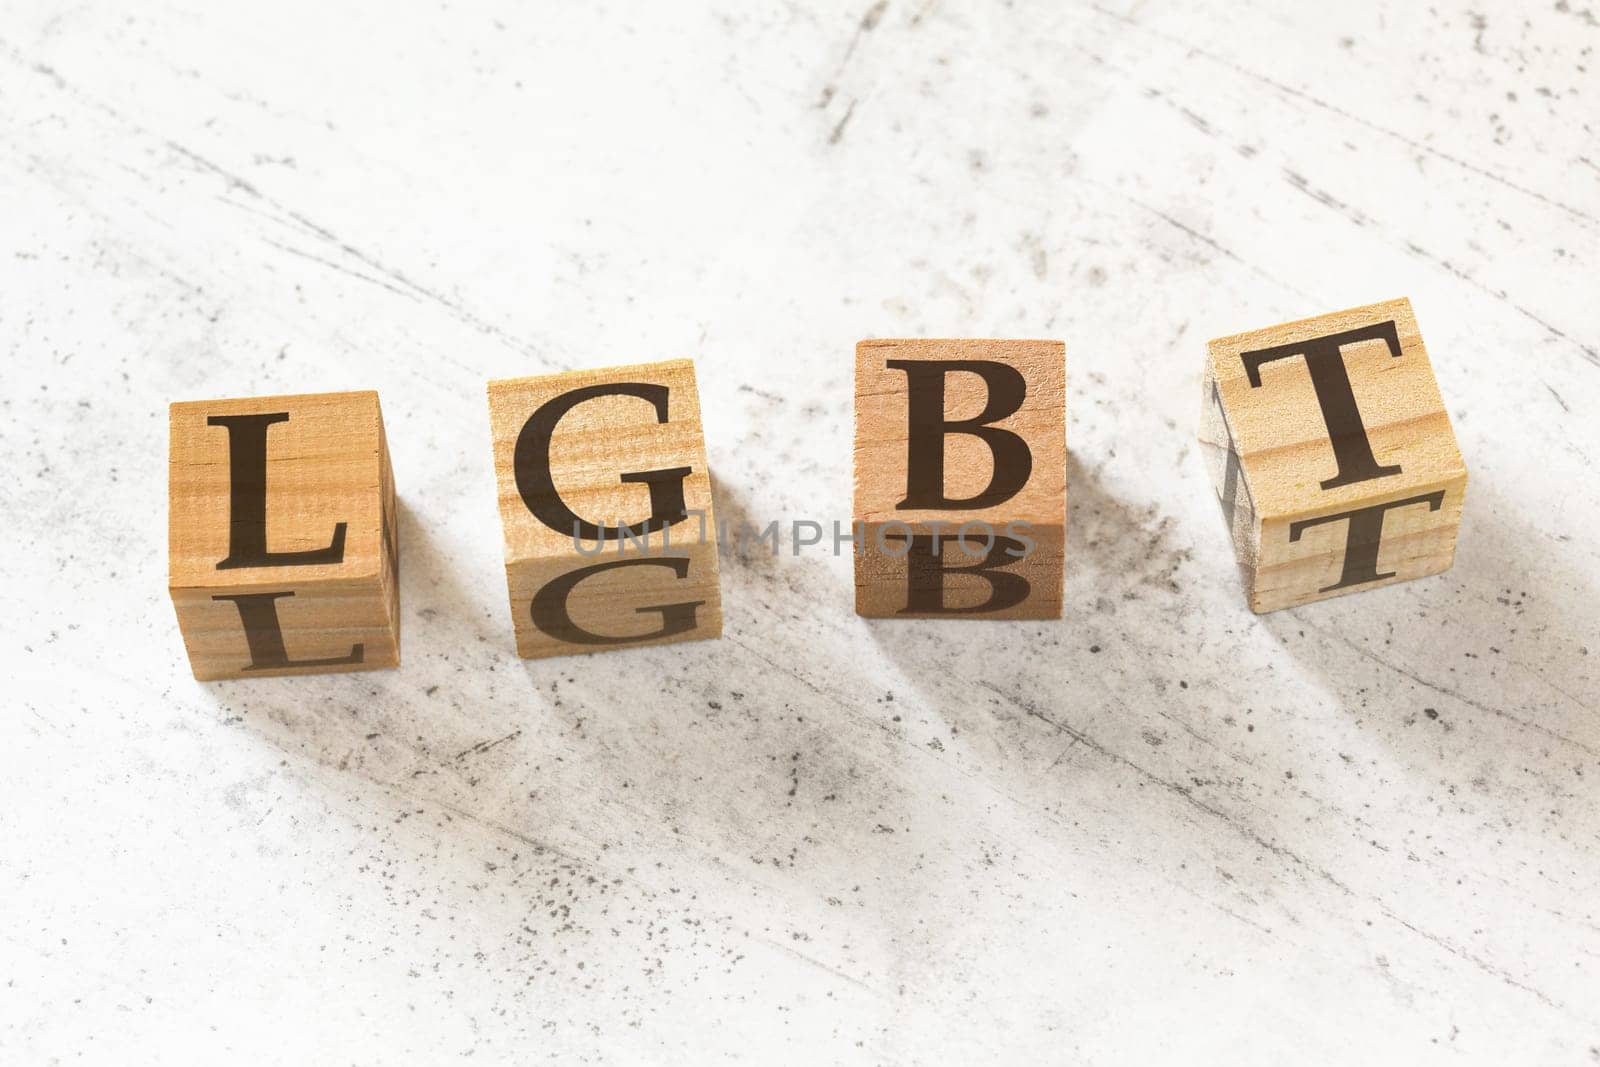 Four wooden cubes with letters LGBT (meaning lesbian, gay, bisexual, and transgender) on white working board. by Ivanko